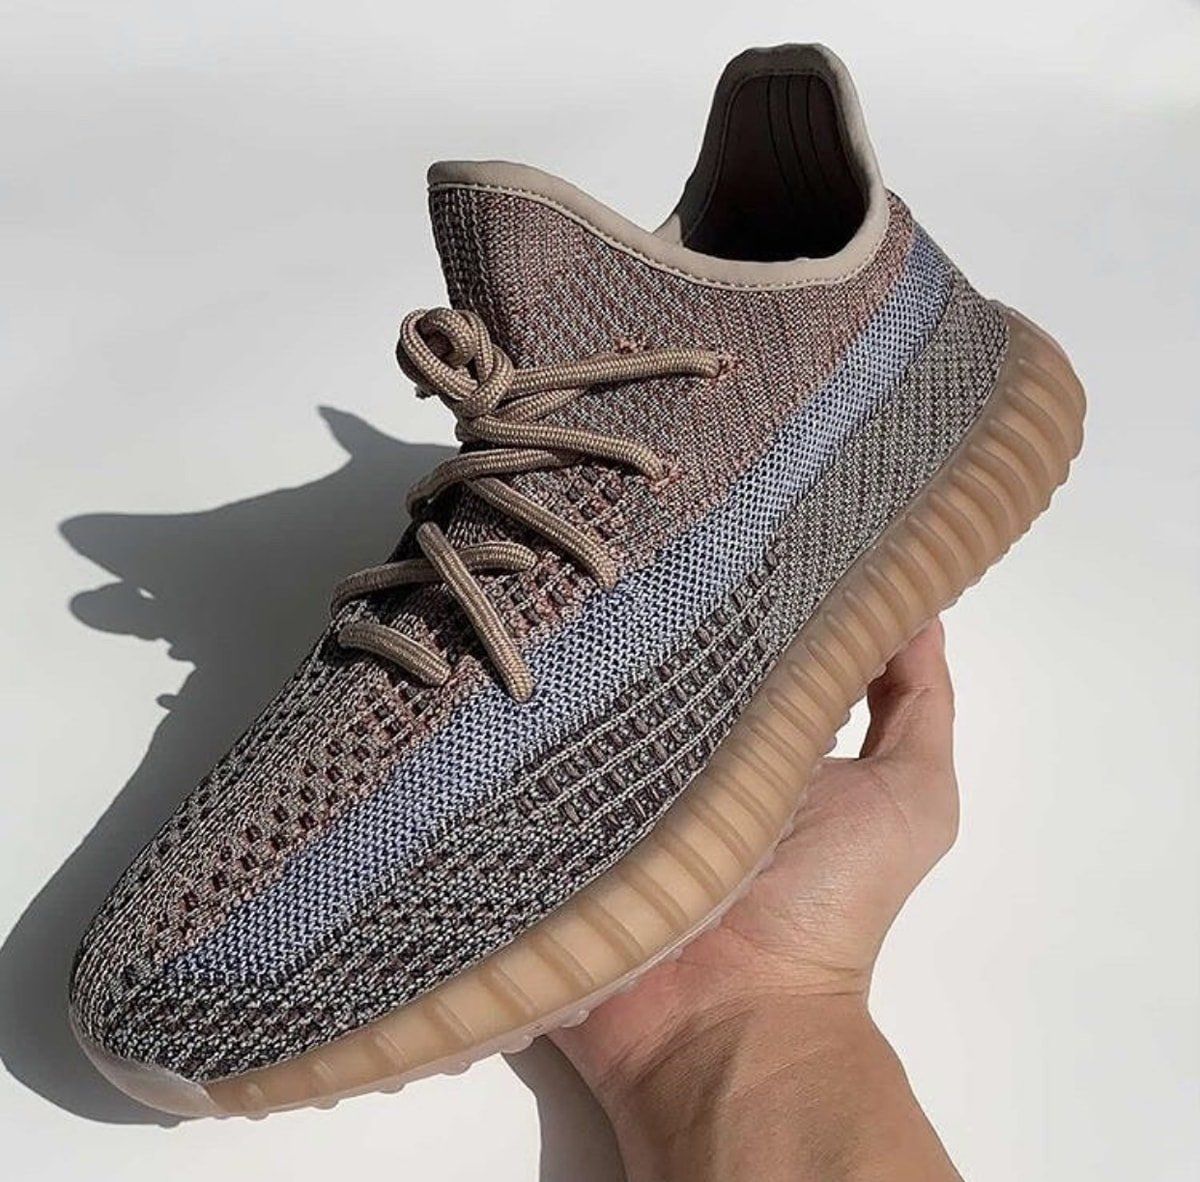 The adidas YEEZY 350 V2 “Fade” Will Release Exclusively in Asia 